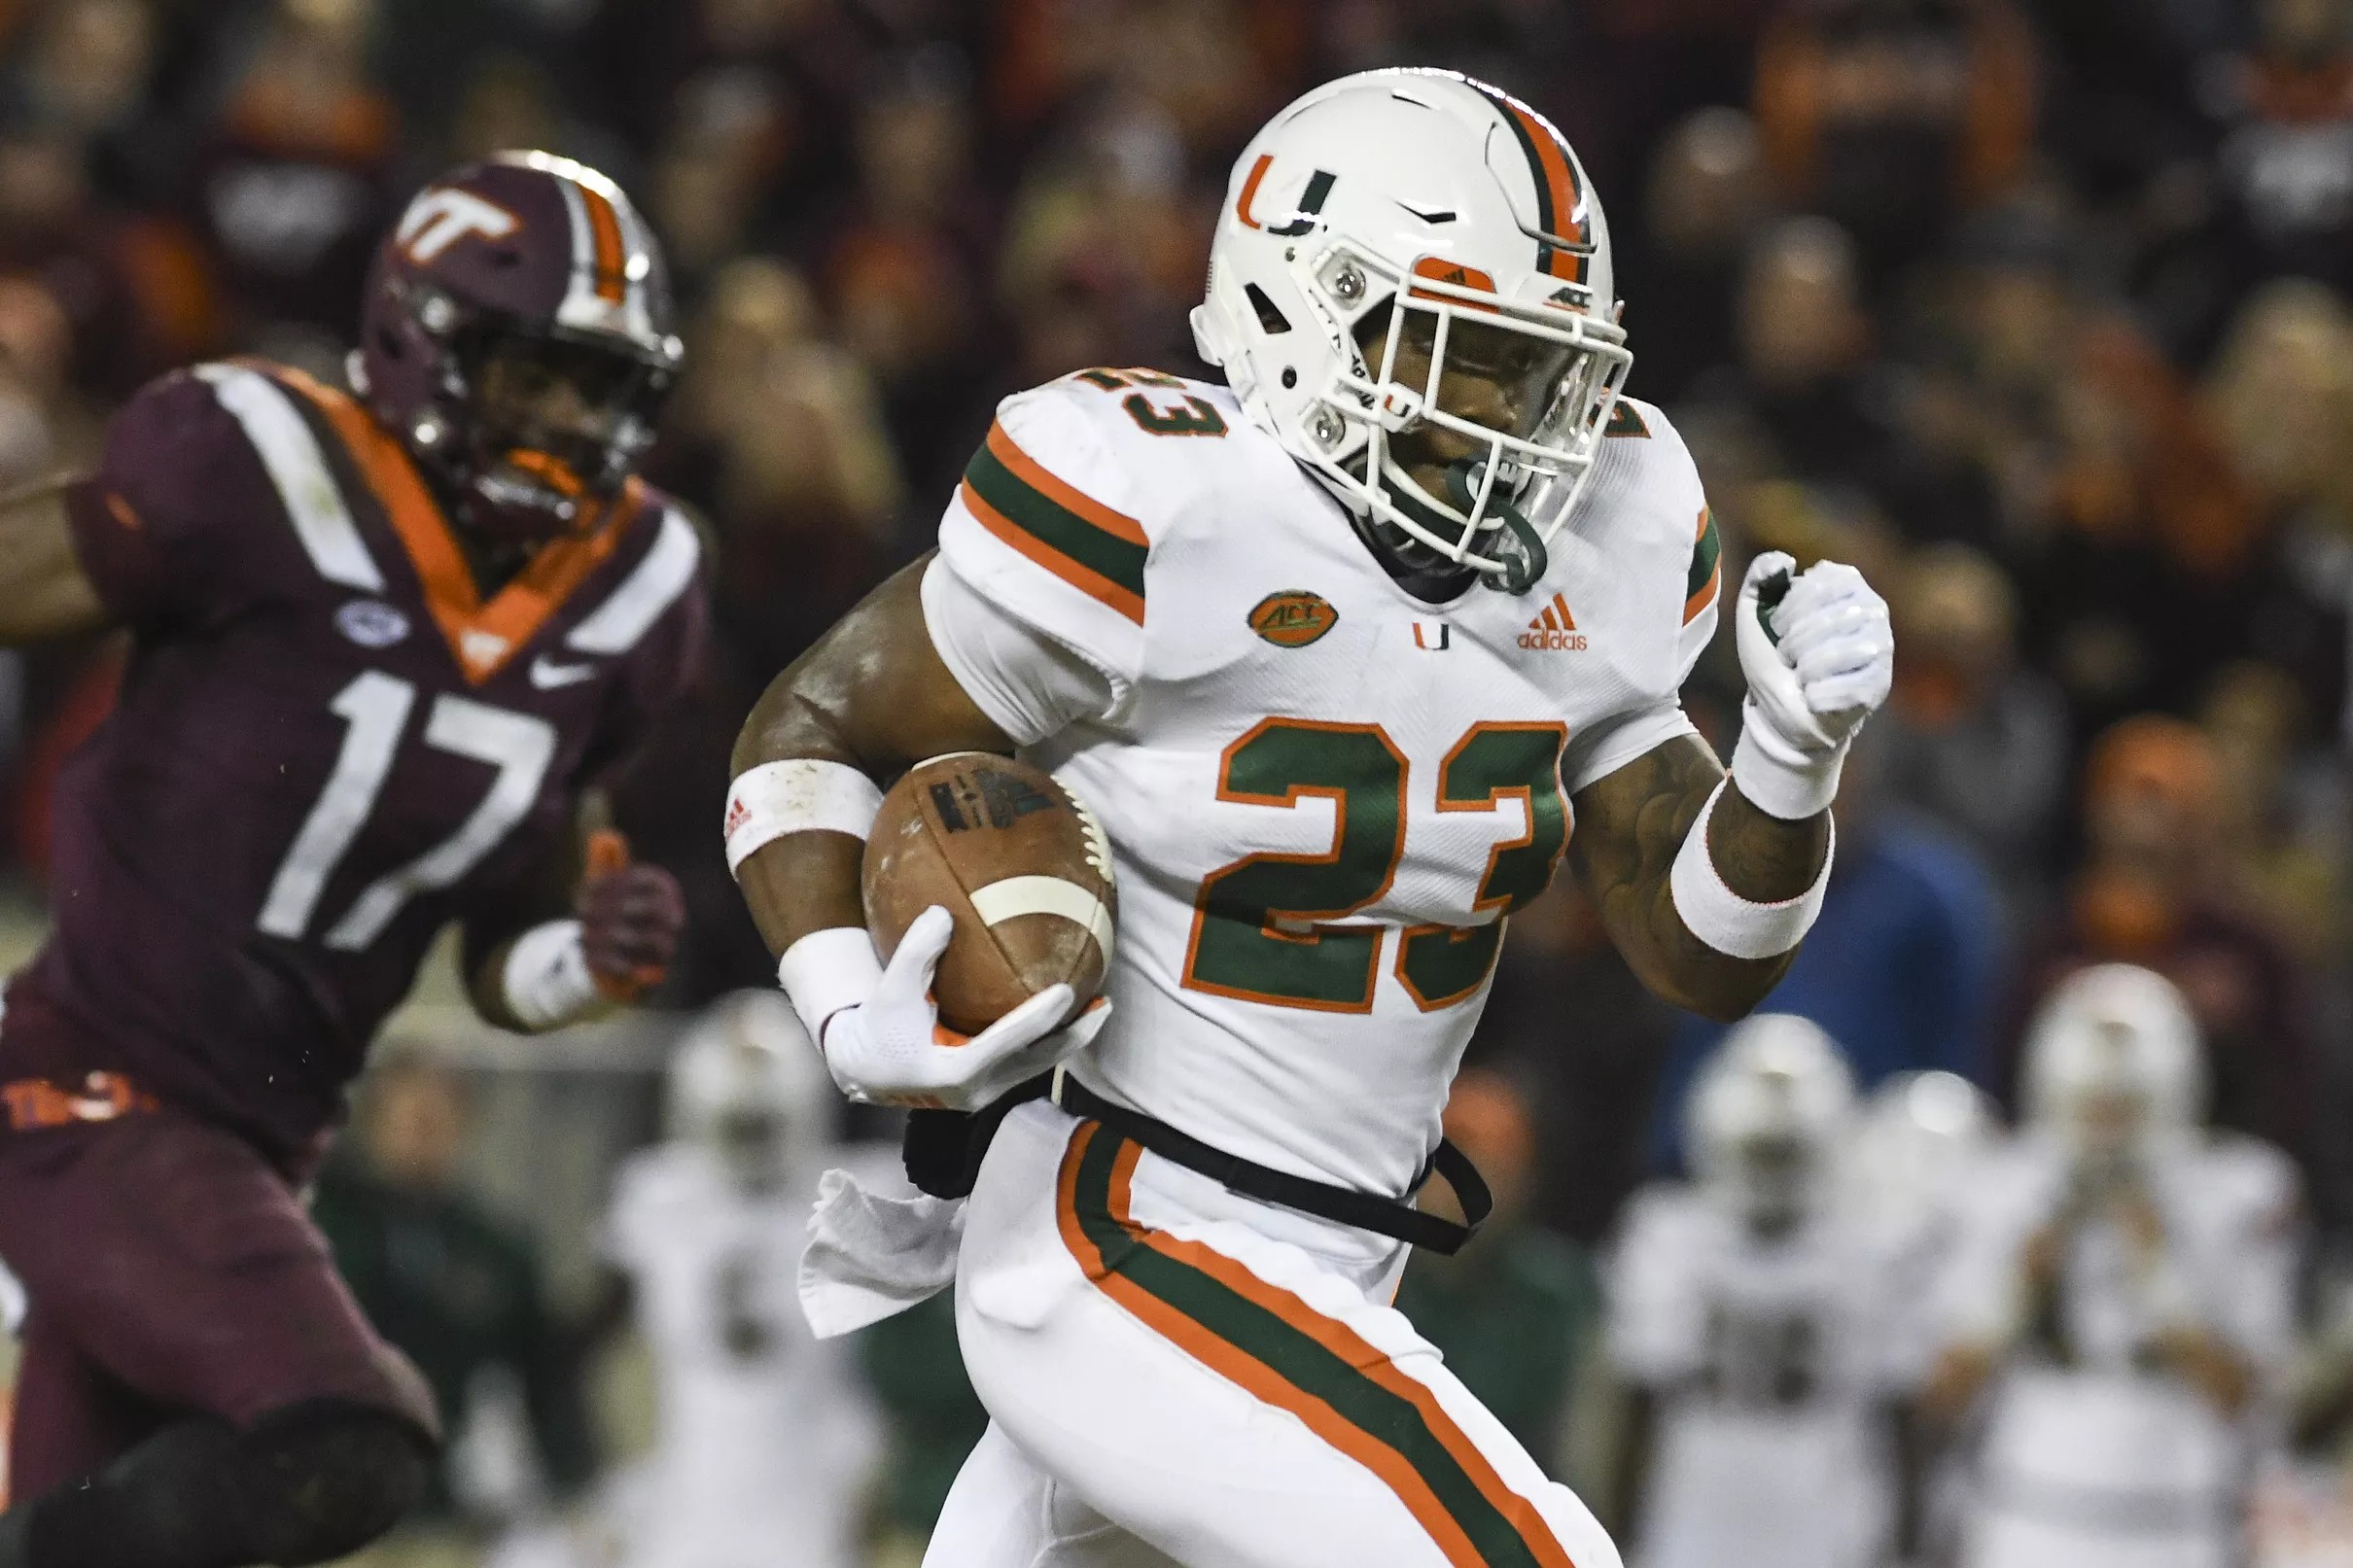 The Path to a Tier 1 Bowl Game for the Canes